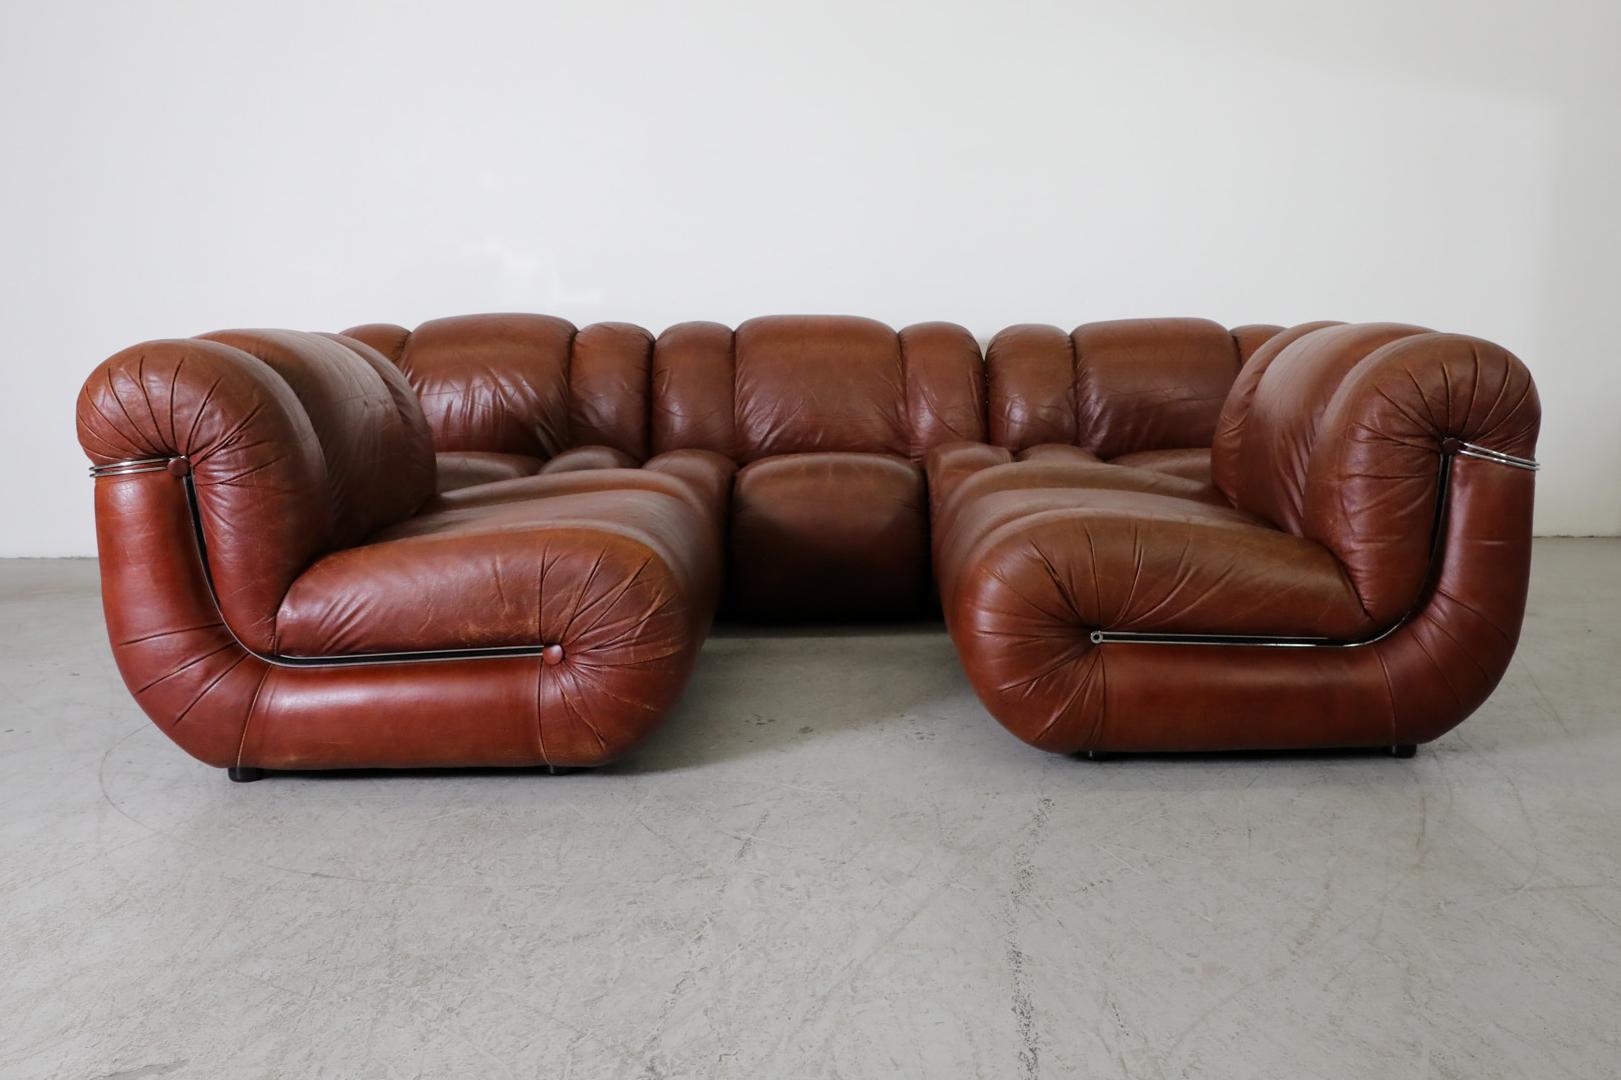 Mimo Padova Velasquez Modular Sofa In Brown Leather And Chrome, Italy 1970s For Sale 14